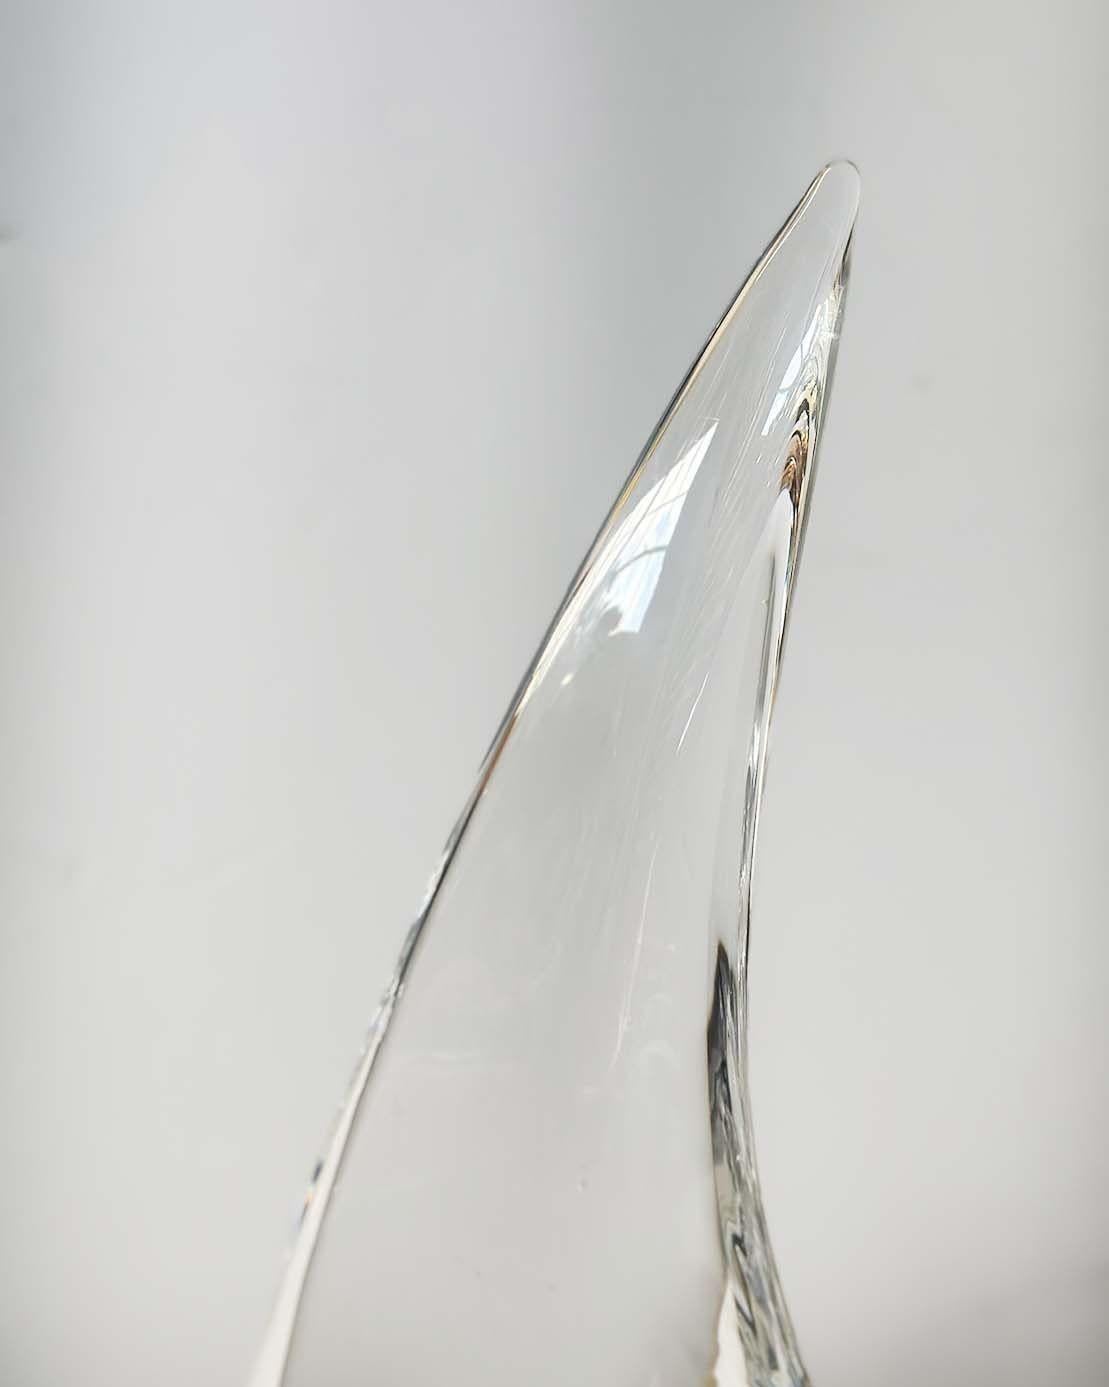 Vintage crystal sculpture of an abstract sailboat by Daum, France c. 1970's. The piece is in great condition with no chips or cracks. Signed 